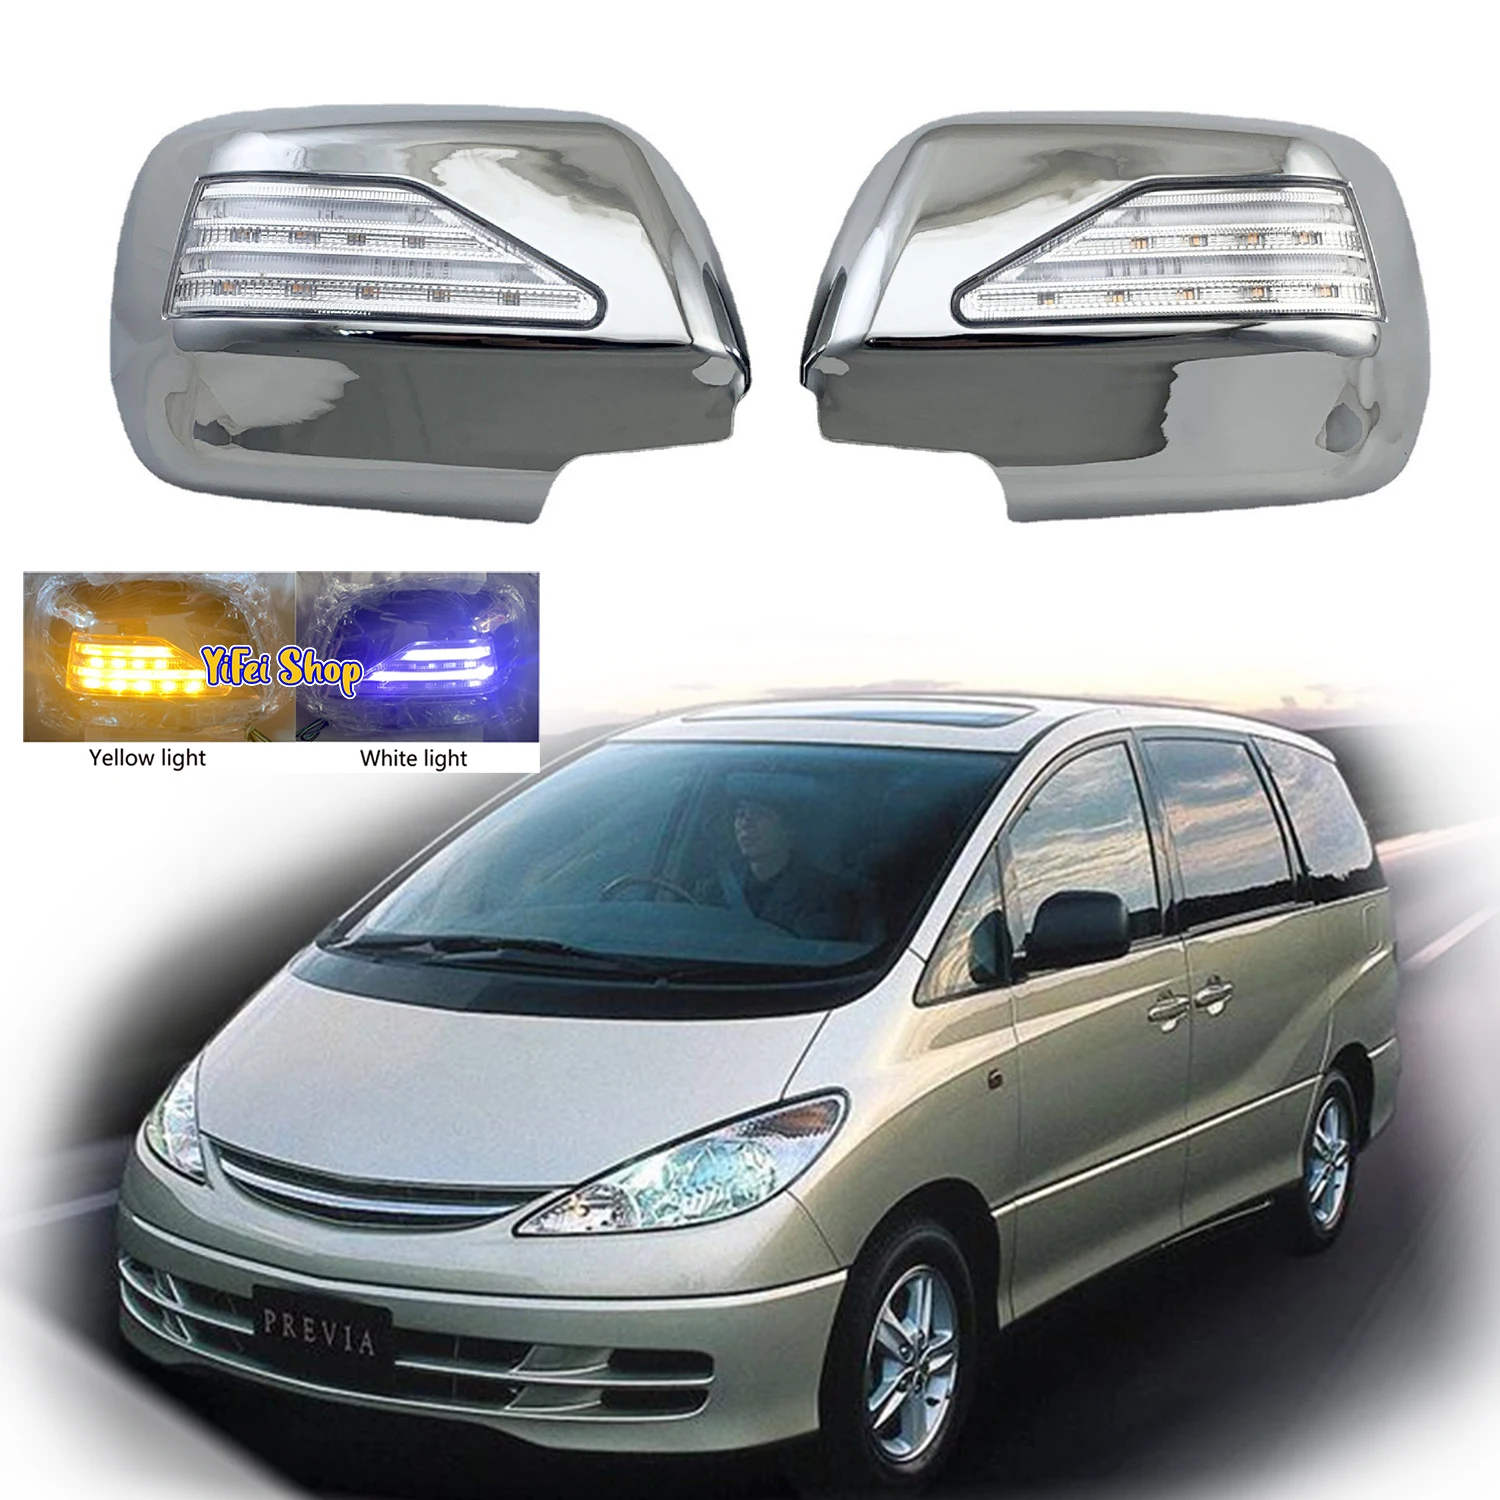 

2pcs Novel Style Car Chrome Accessories Plated Trim 1998 2000 2003 2005 For Toyota PREVIA Door Mirror Cover With LED